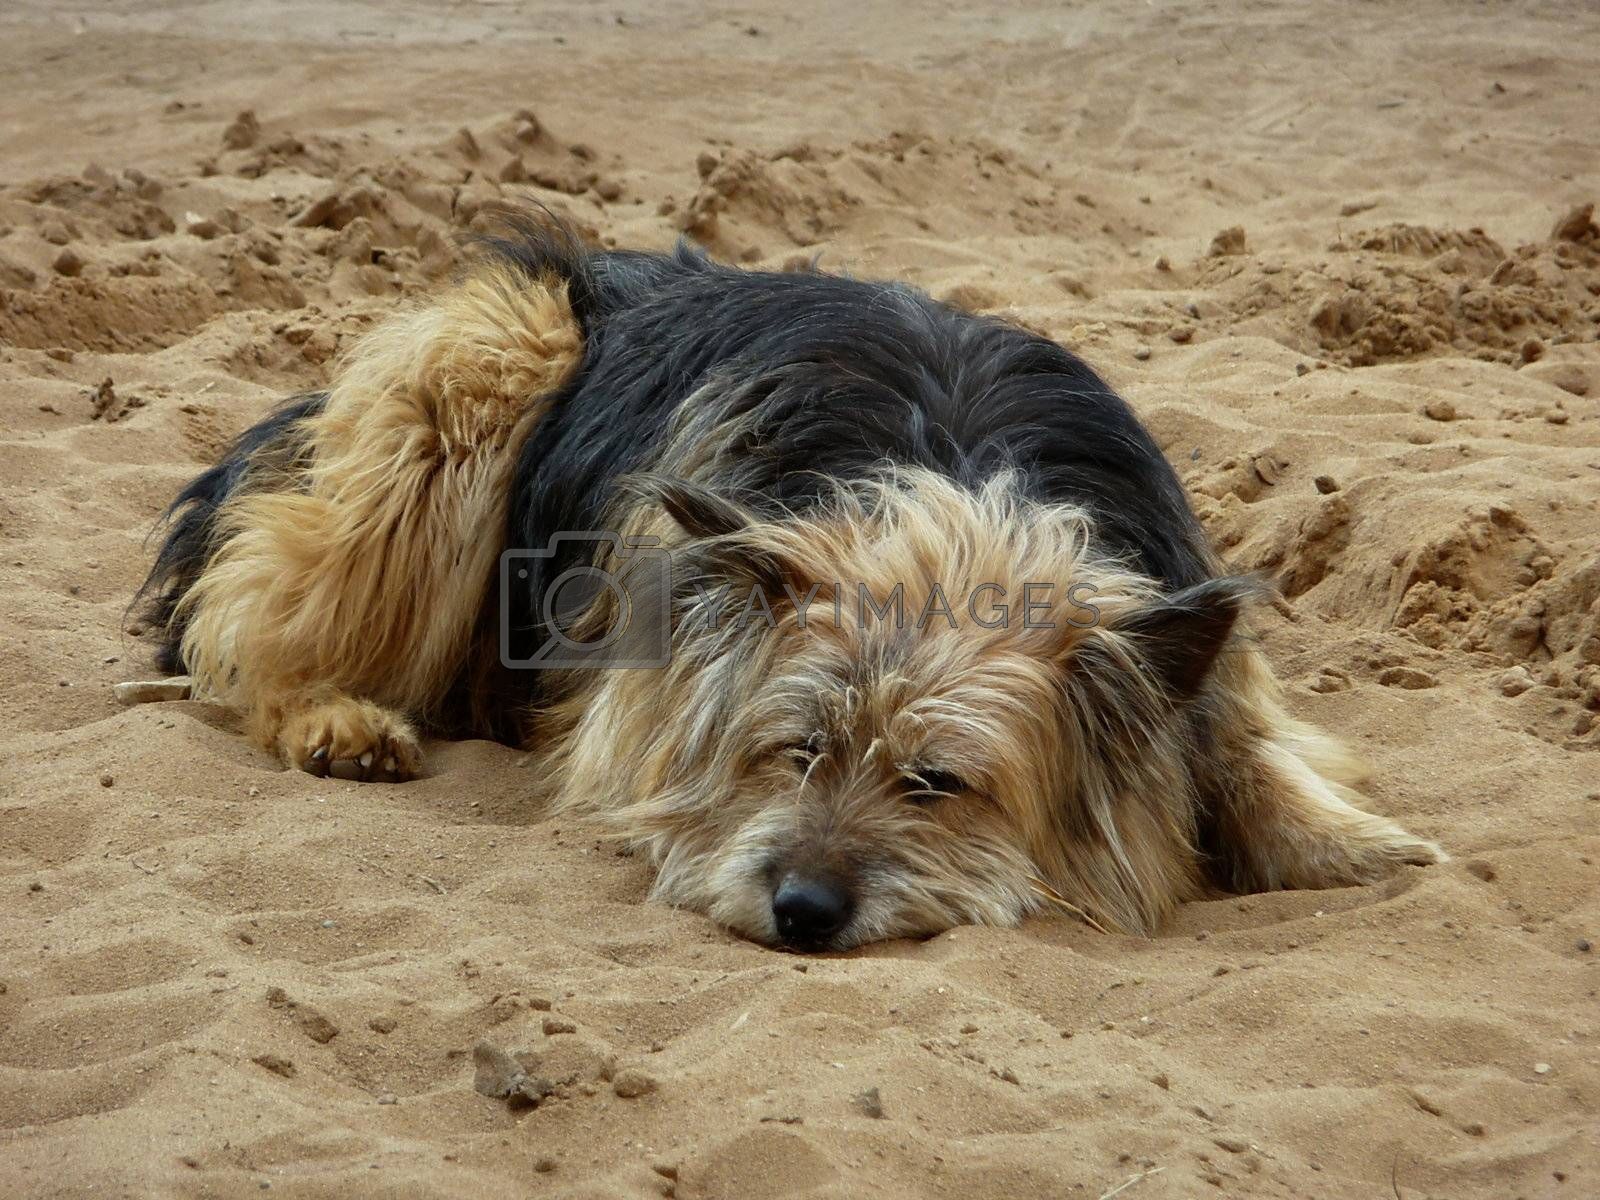 A Dog feeling lonely lying in the sand